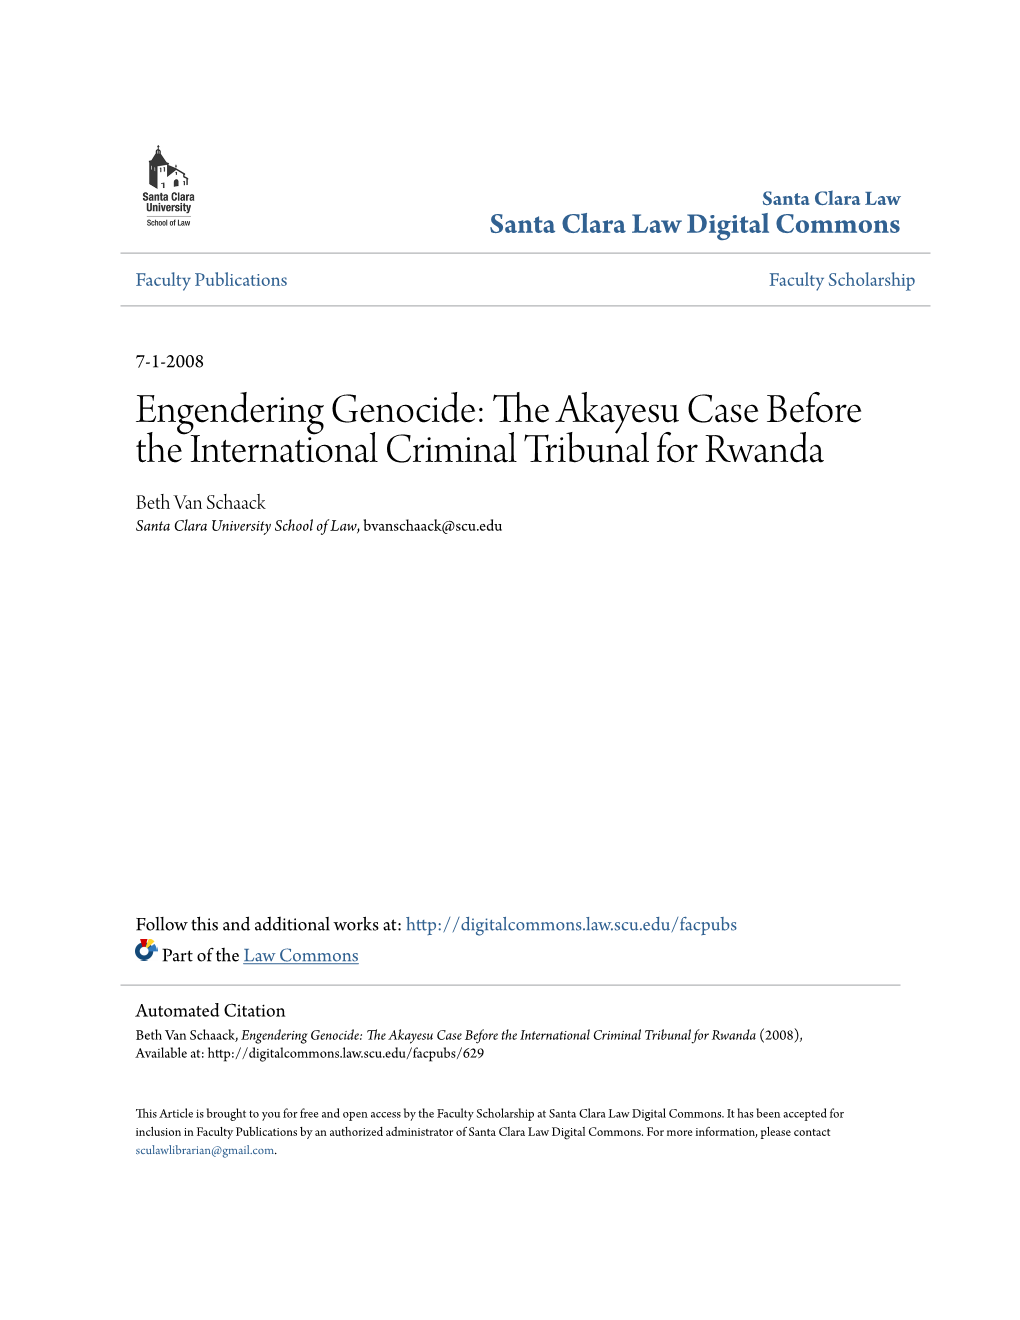 Engendering Genocide: the Akayesu Case Before the International